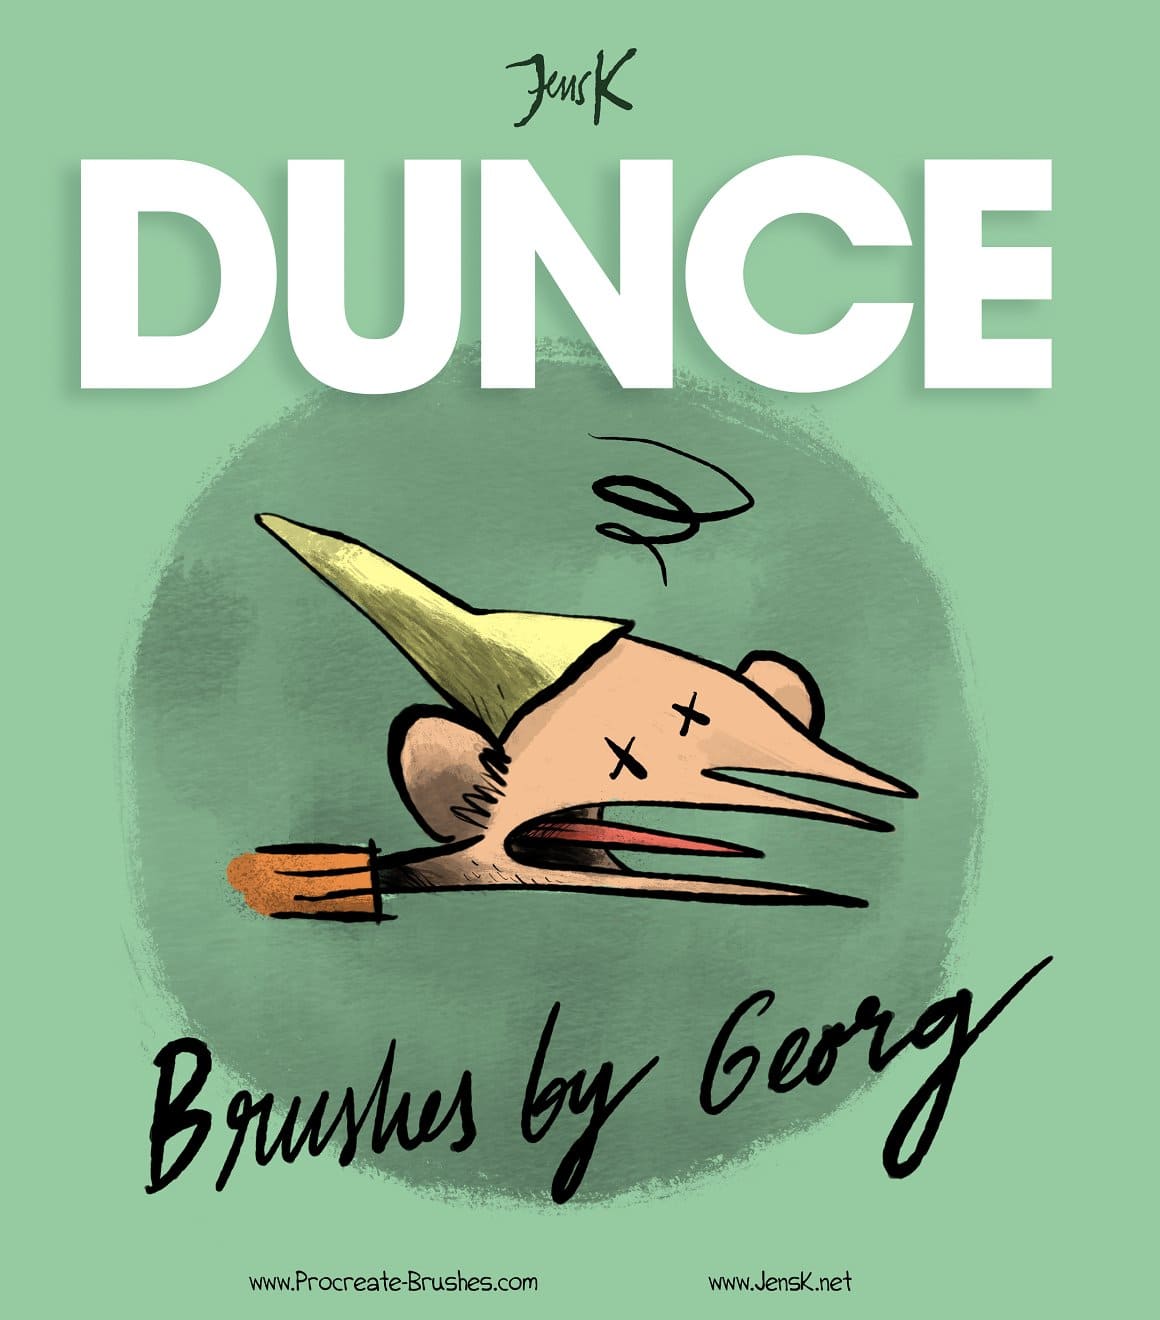 Dunce brushes cover jensk styve, 1160 by 1320 pixels.